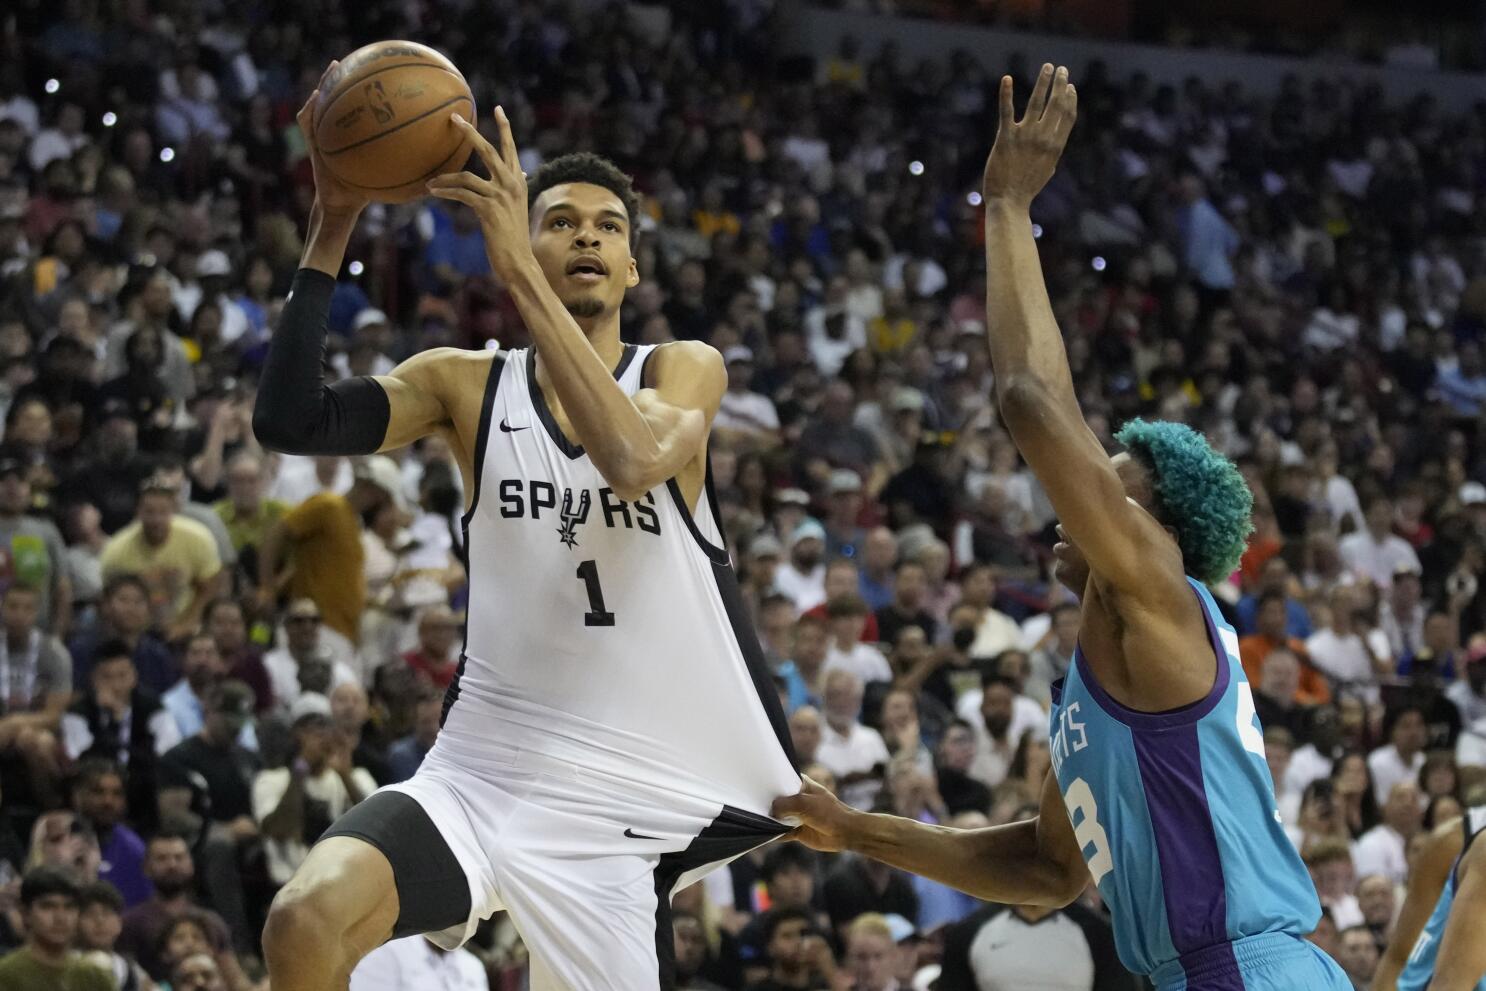 Spurs announce free open scrimmage ahead of season. Here's how to get  tickets.